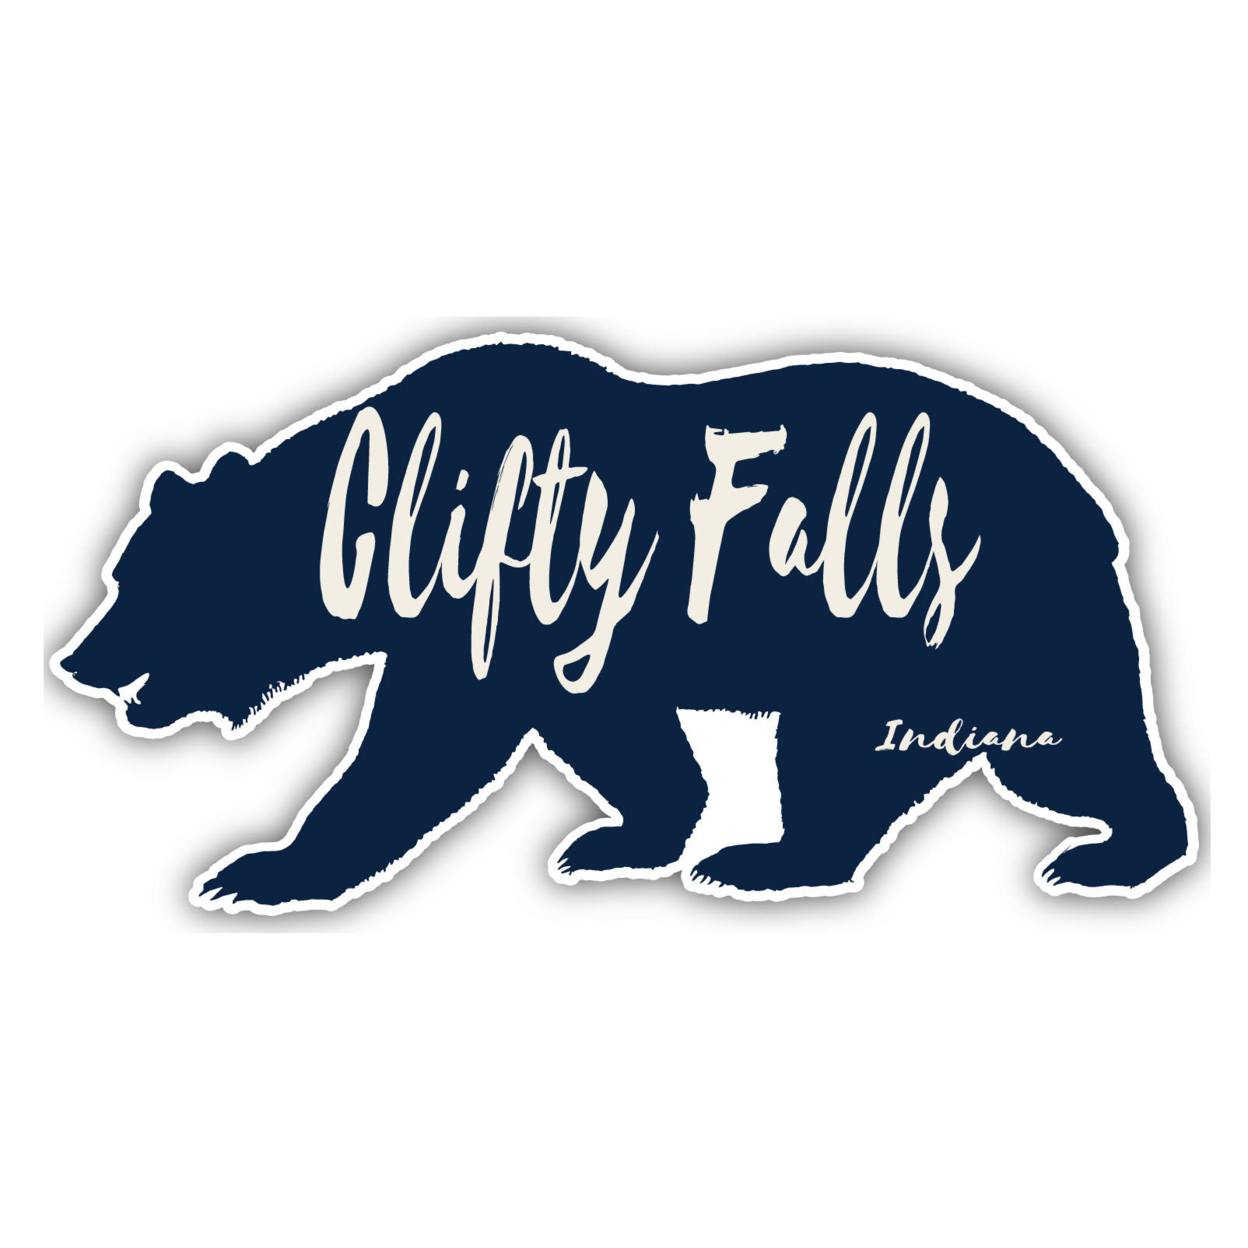 Clifty Falls Indiana Souvenir Decorative Stickers (Choose Theme And Size) - Single Unit, 10-Inch, Bear